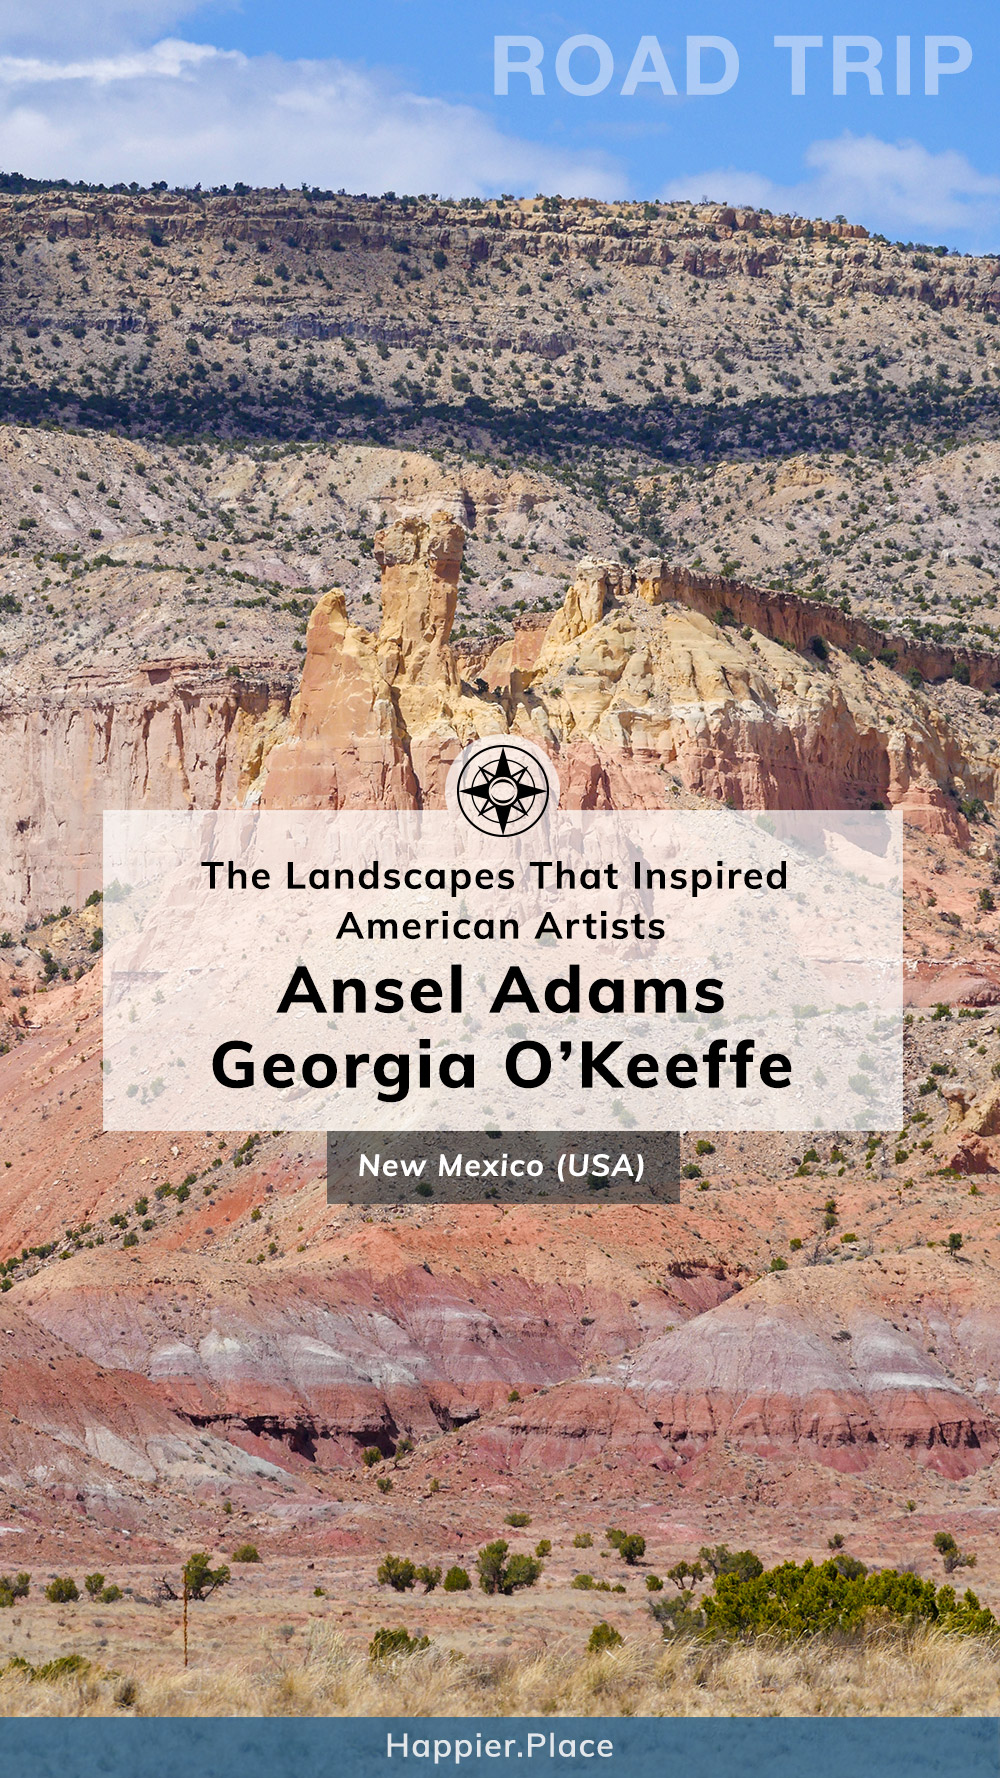 Road Trip through the landscapes that inspired American Artists Ansel Adams and Georgia O'Keeffe in New Mexico, USA, Chimney Rock, Ghost Ranch, Happier Place